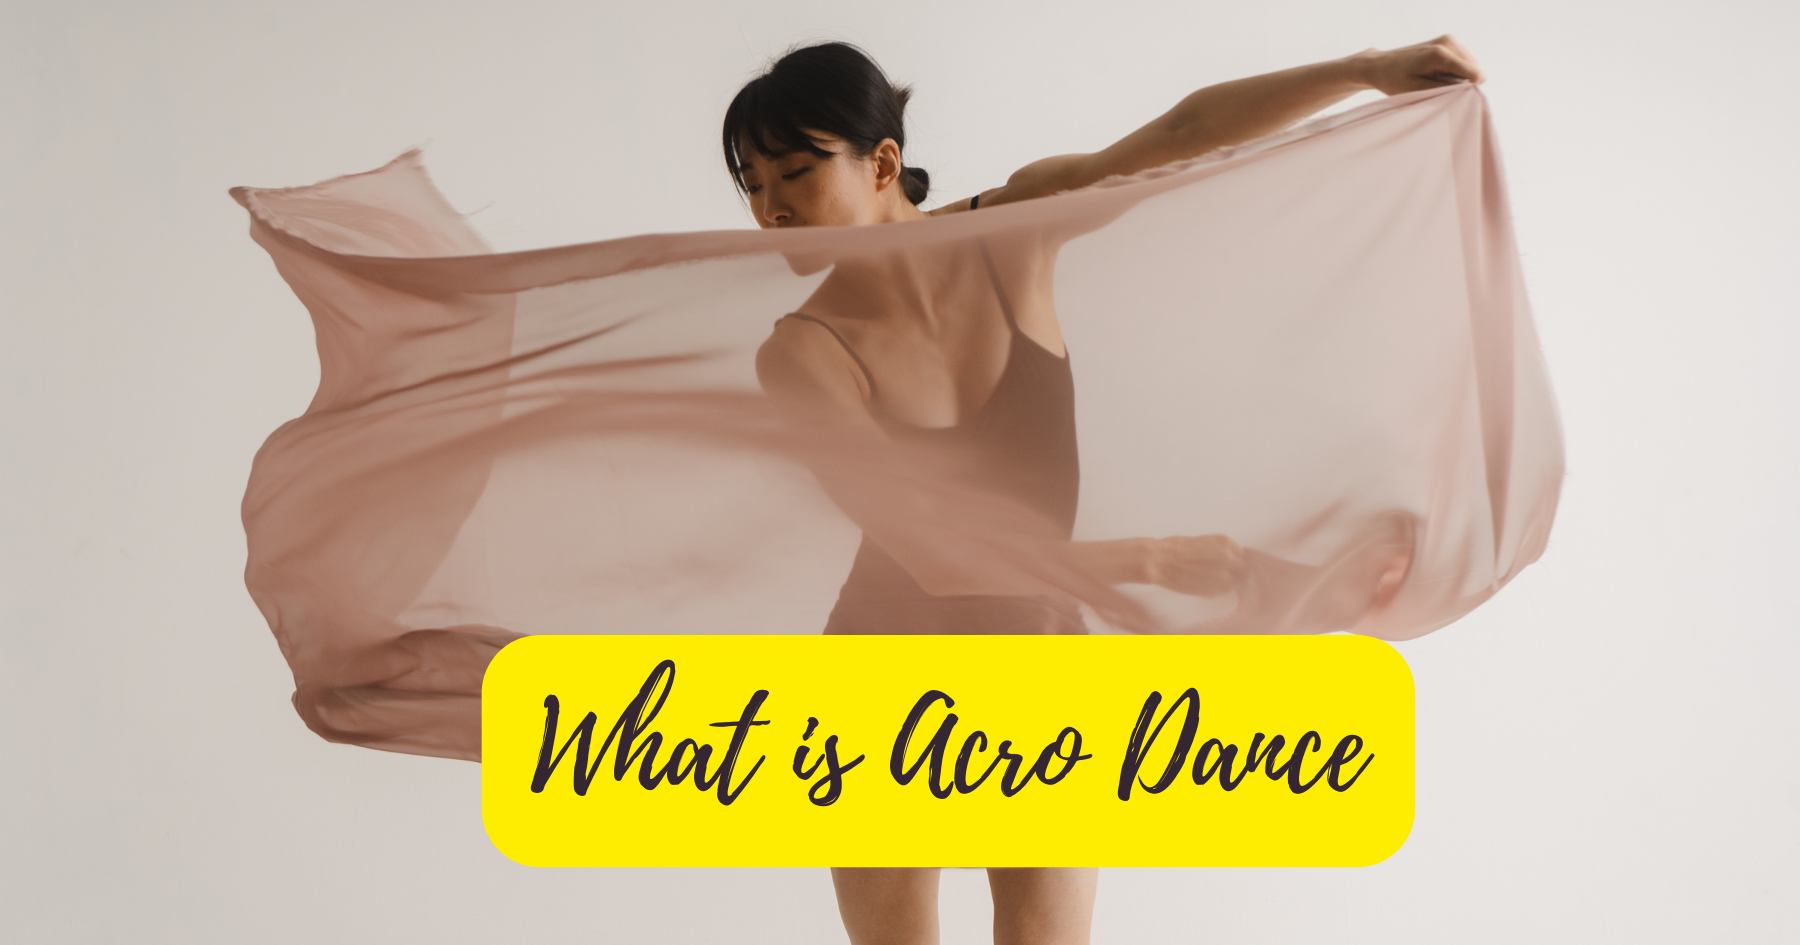 What is Acro Dance